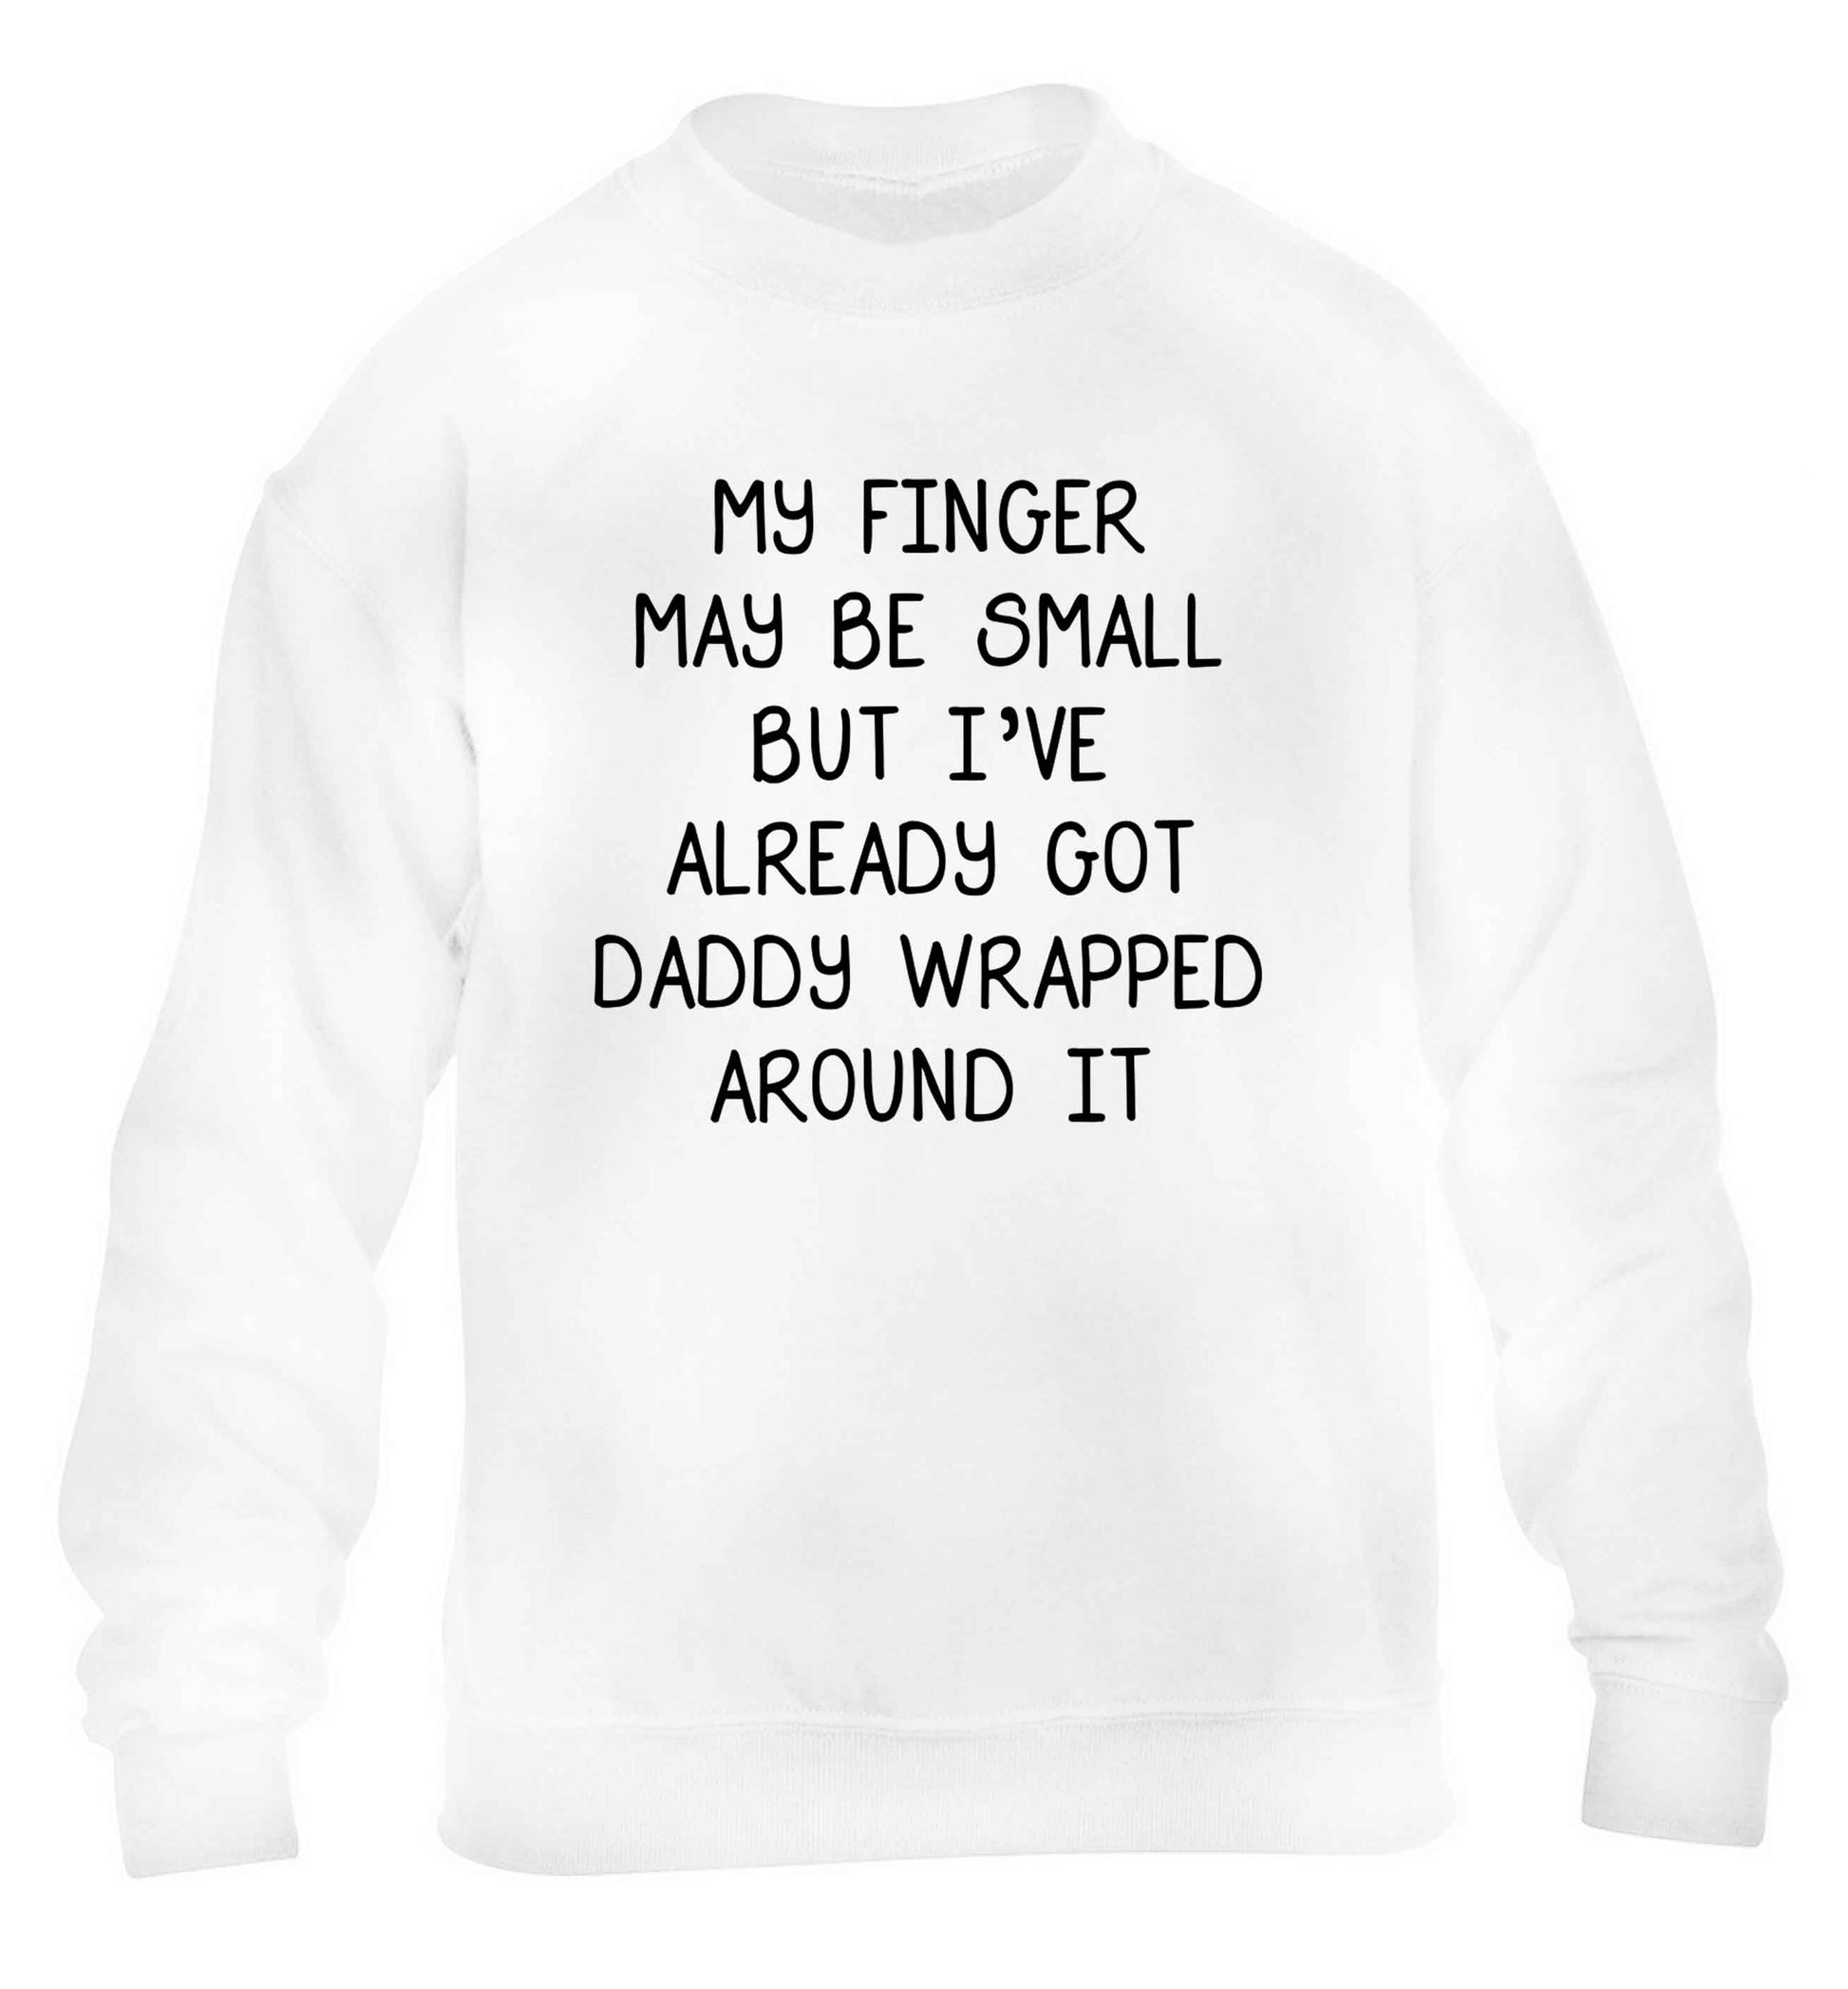 My finger may be small but I've already got daddy wrapped around it children's white sweater 12-13 Years